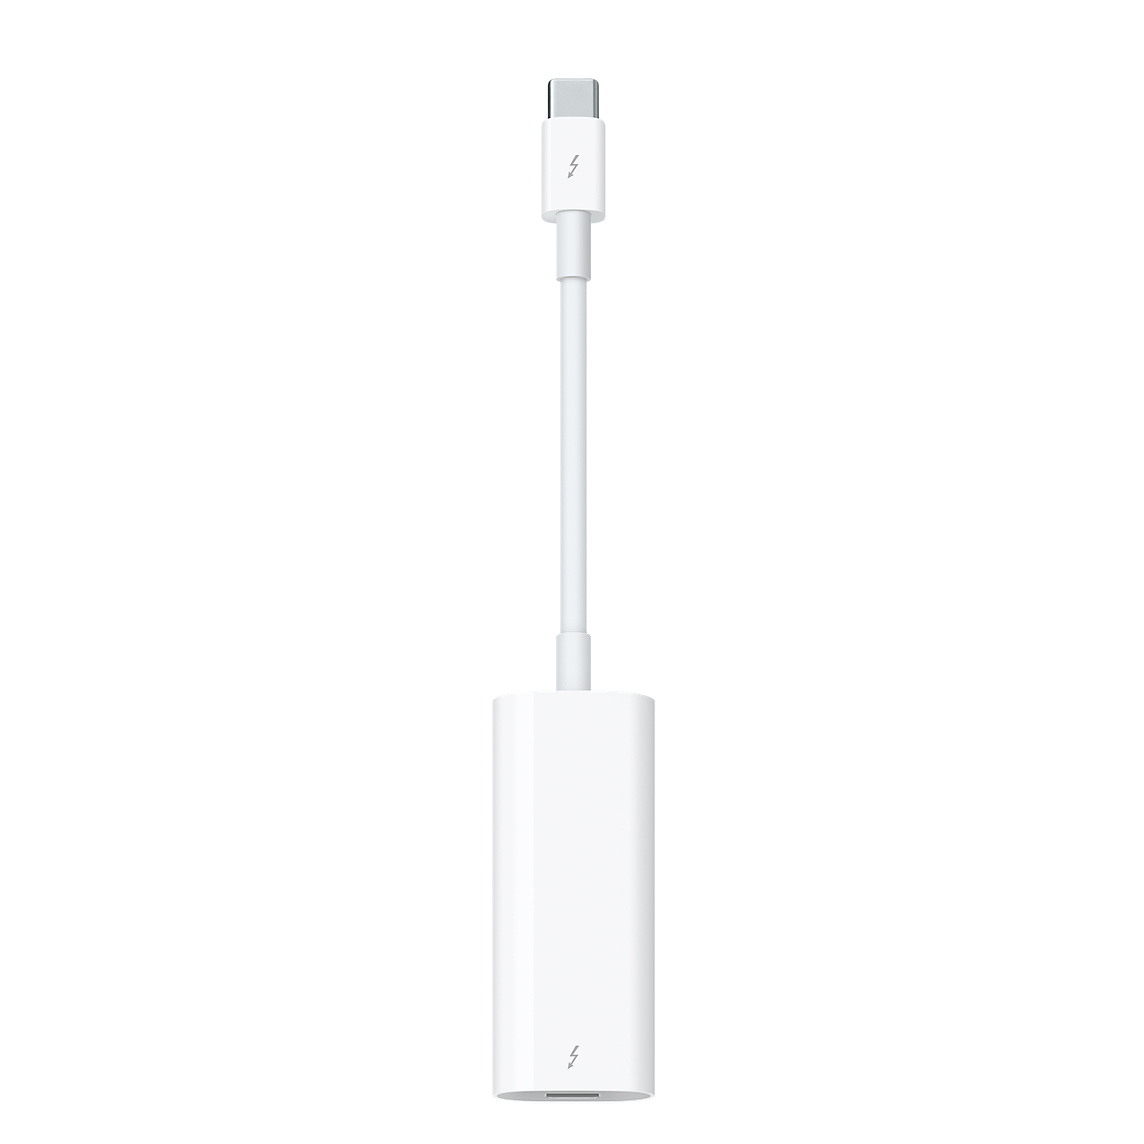 thunderbolt to usb 3 adapter for mac 2010